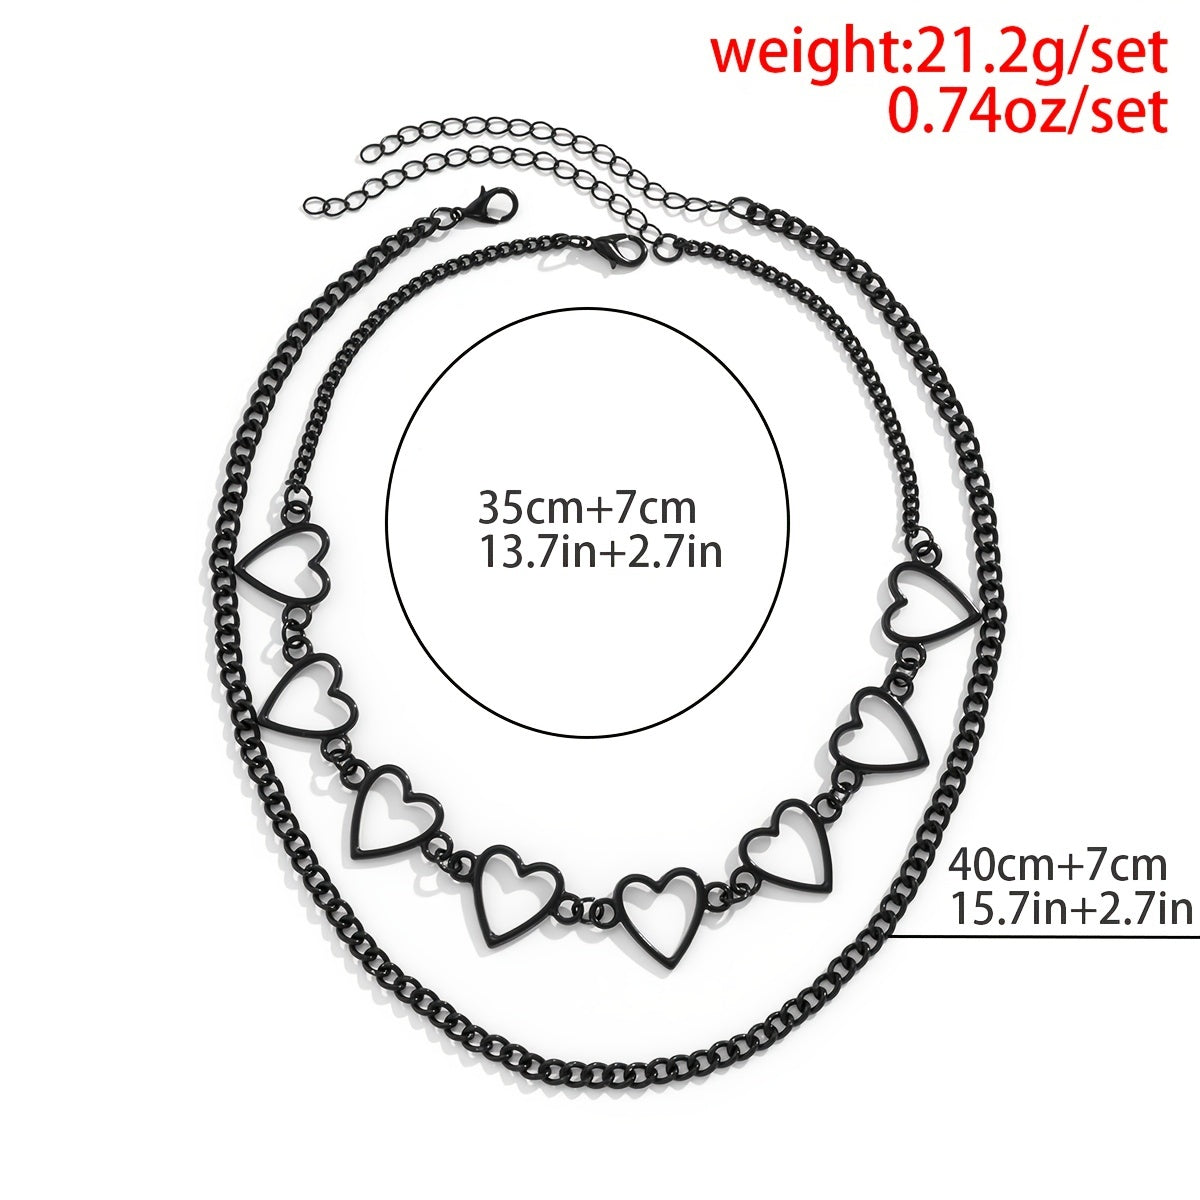 Hollow Out Heart Set Necklace 2 Piece Pack Women's Fashion Jewelry Holiday Style